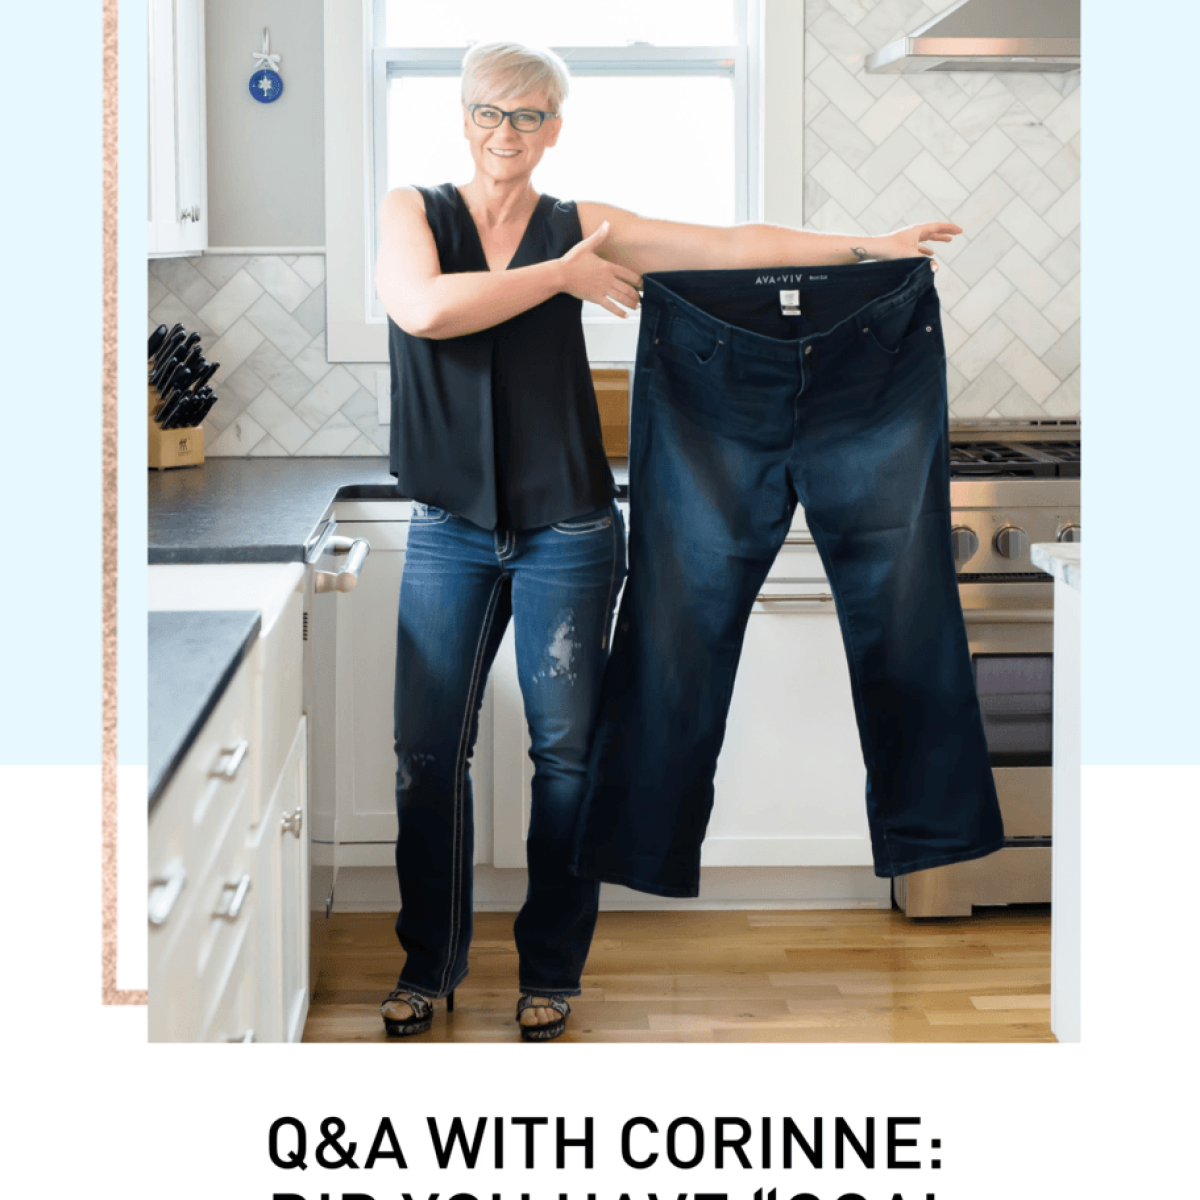 Q&a with corinne did you have goal clothes on your journey?.